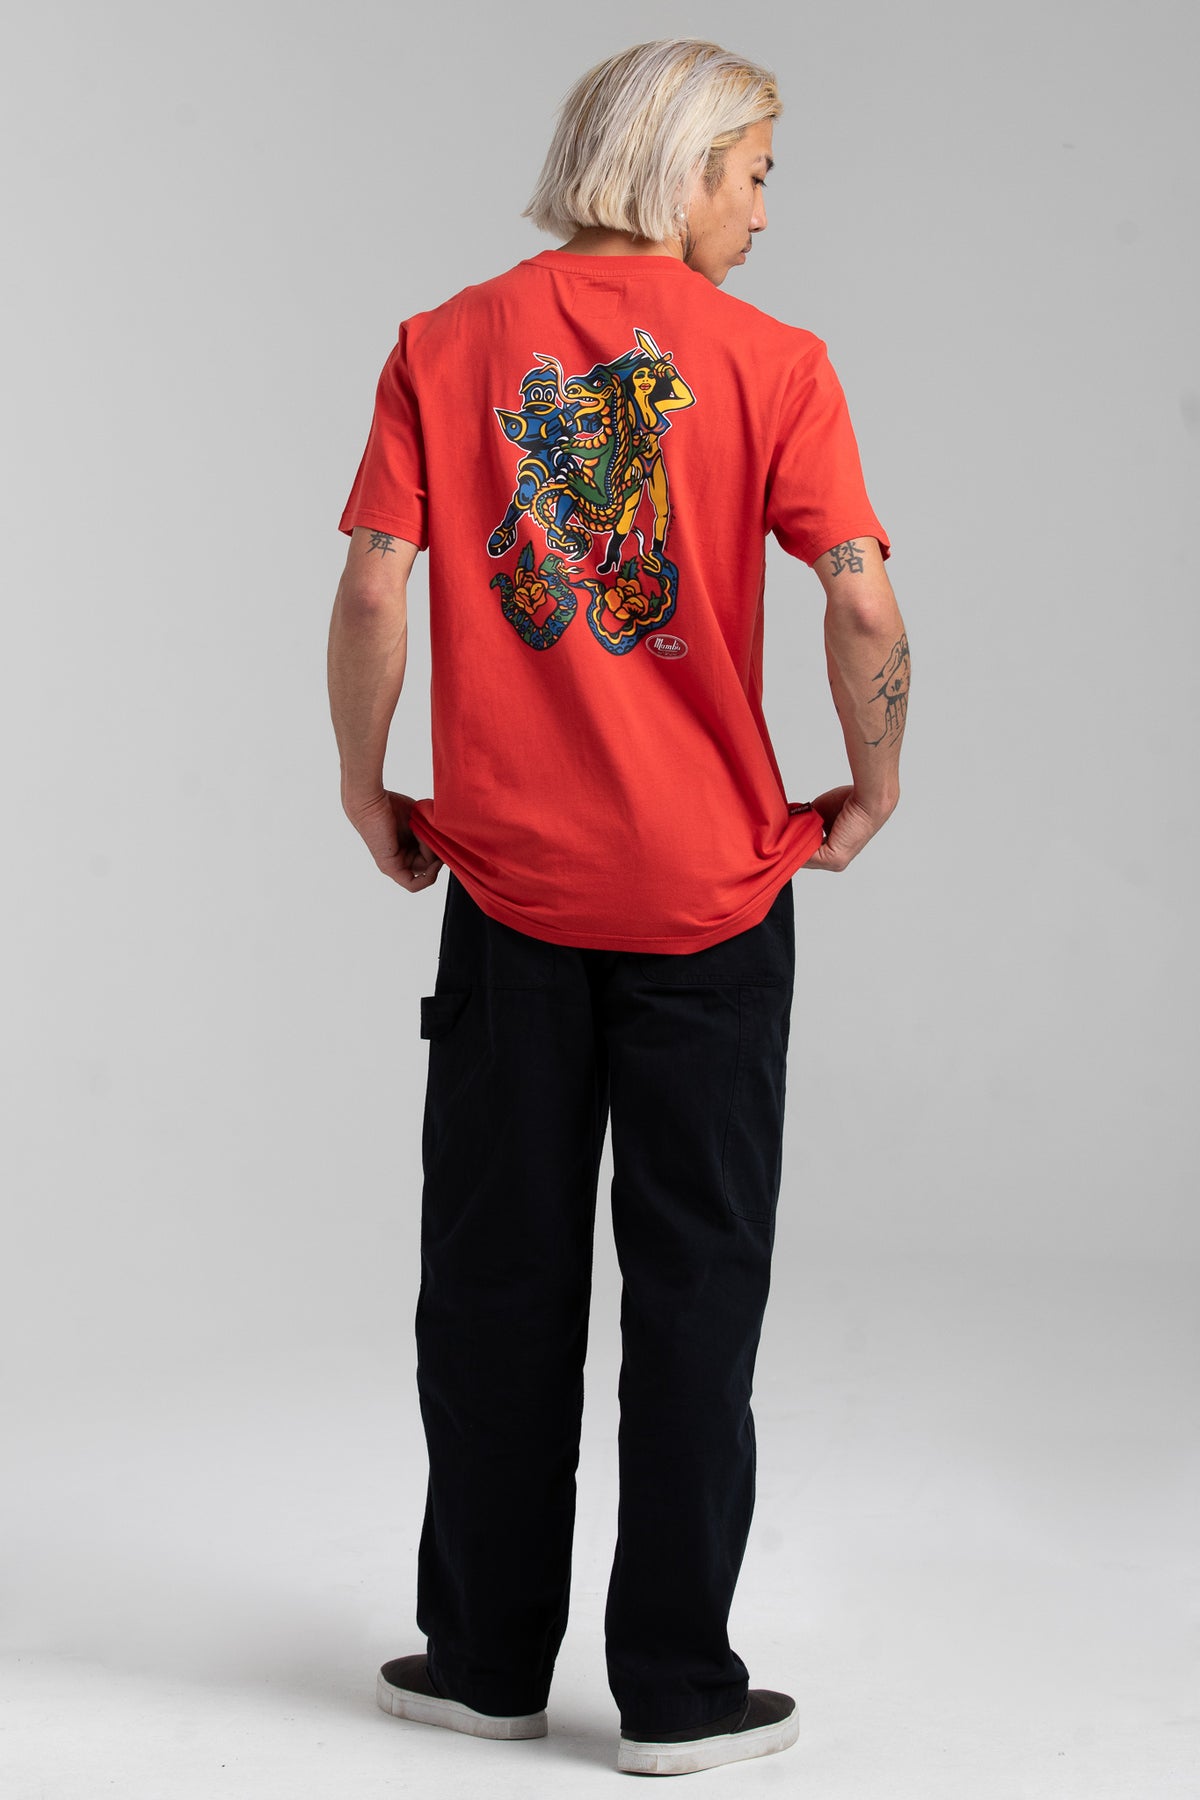 MCKAY T-SHIRT - 1 RED